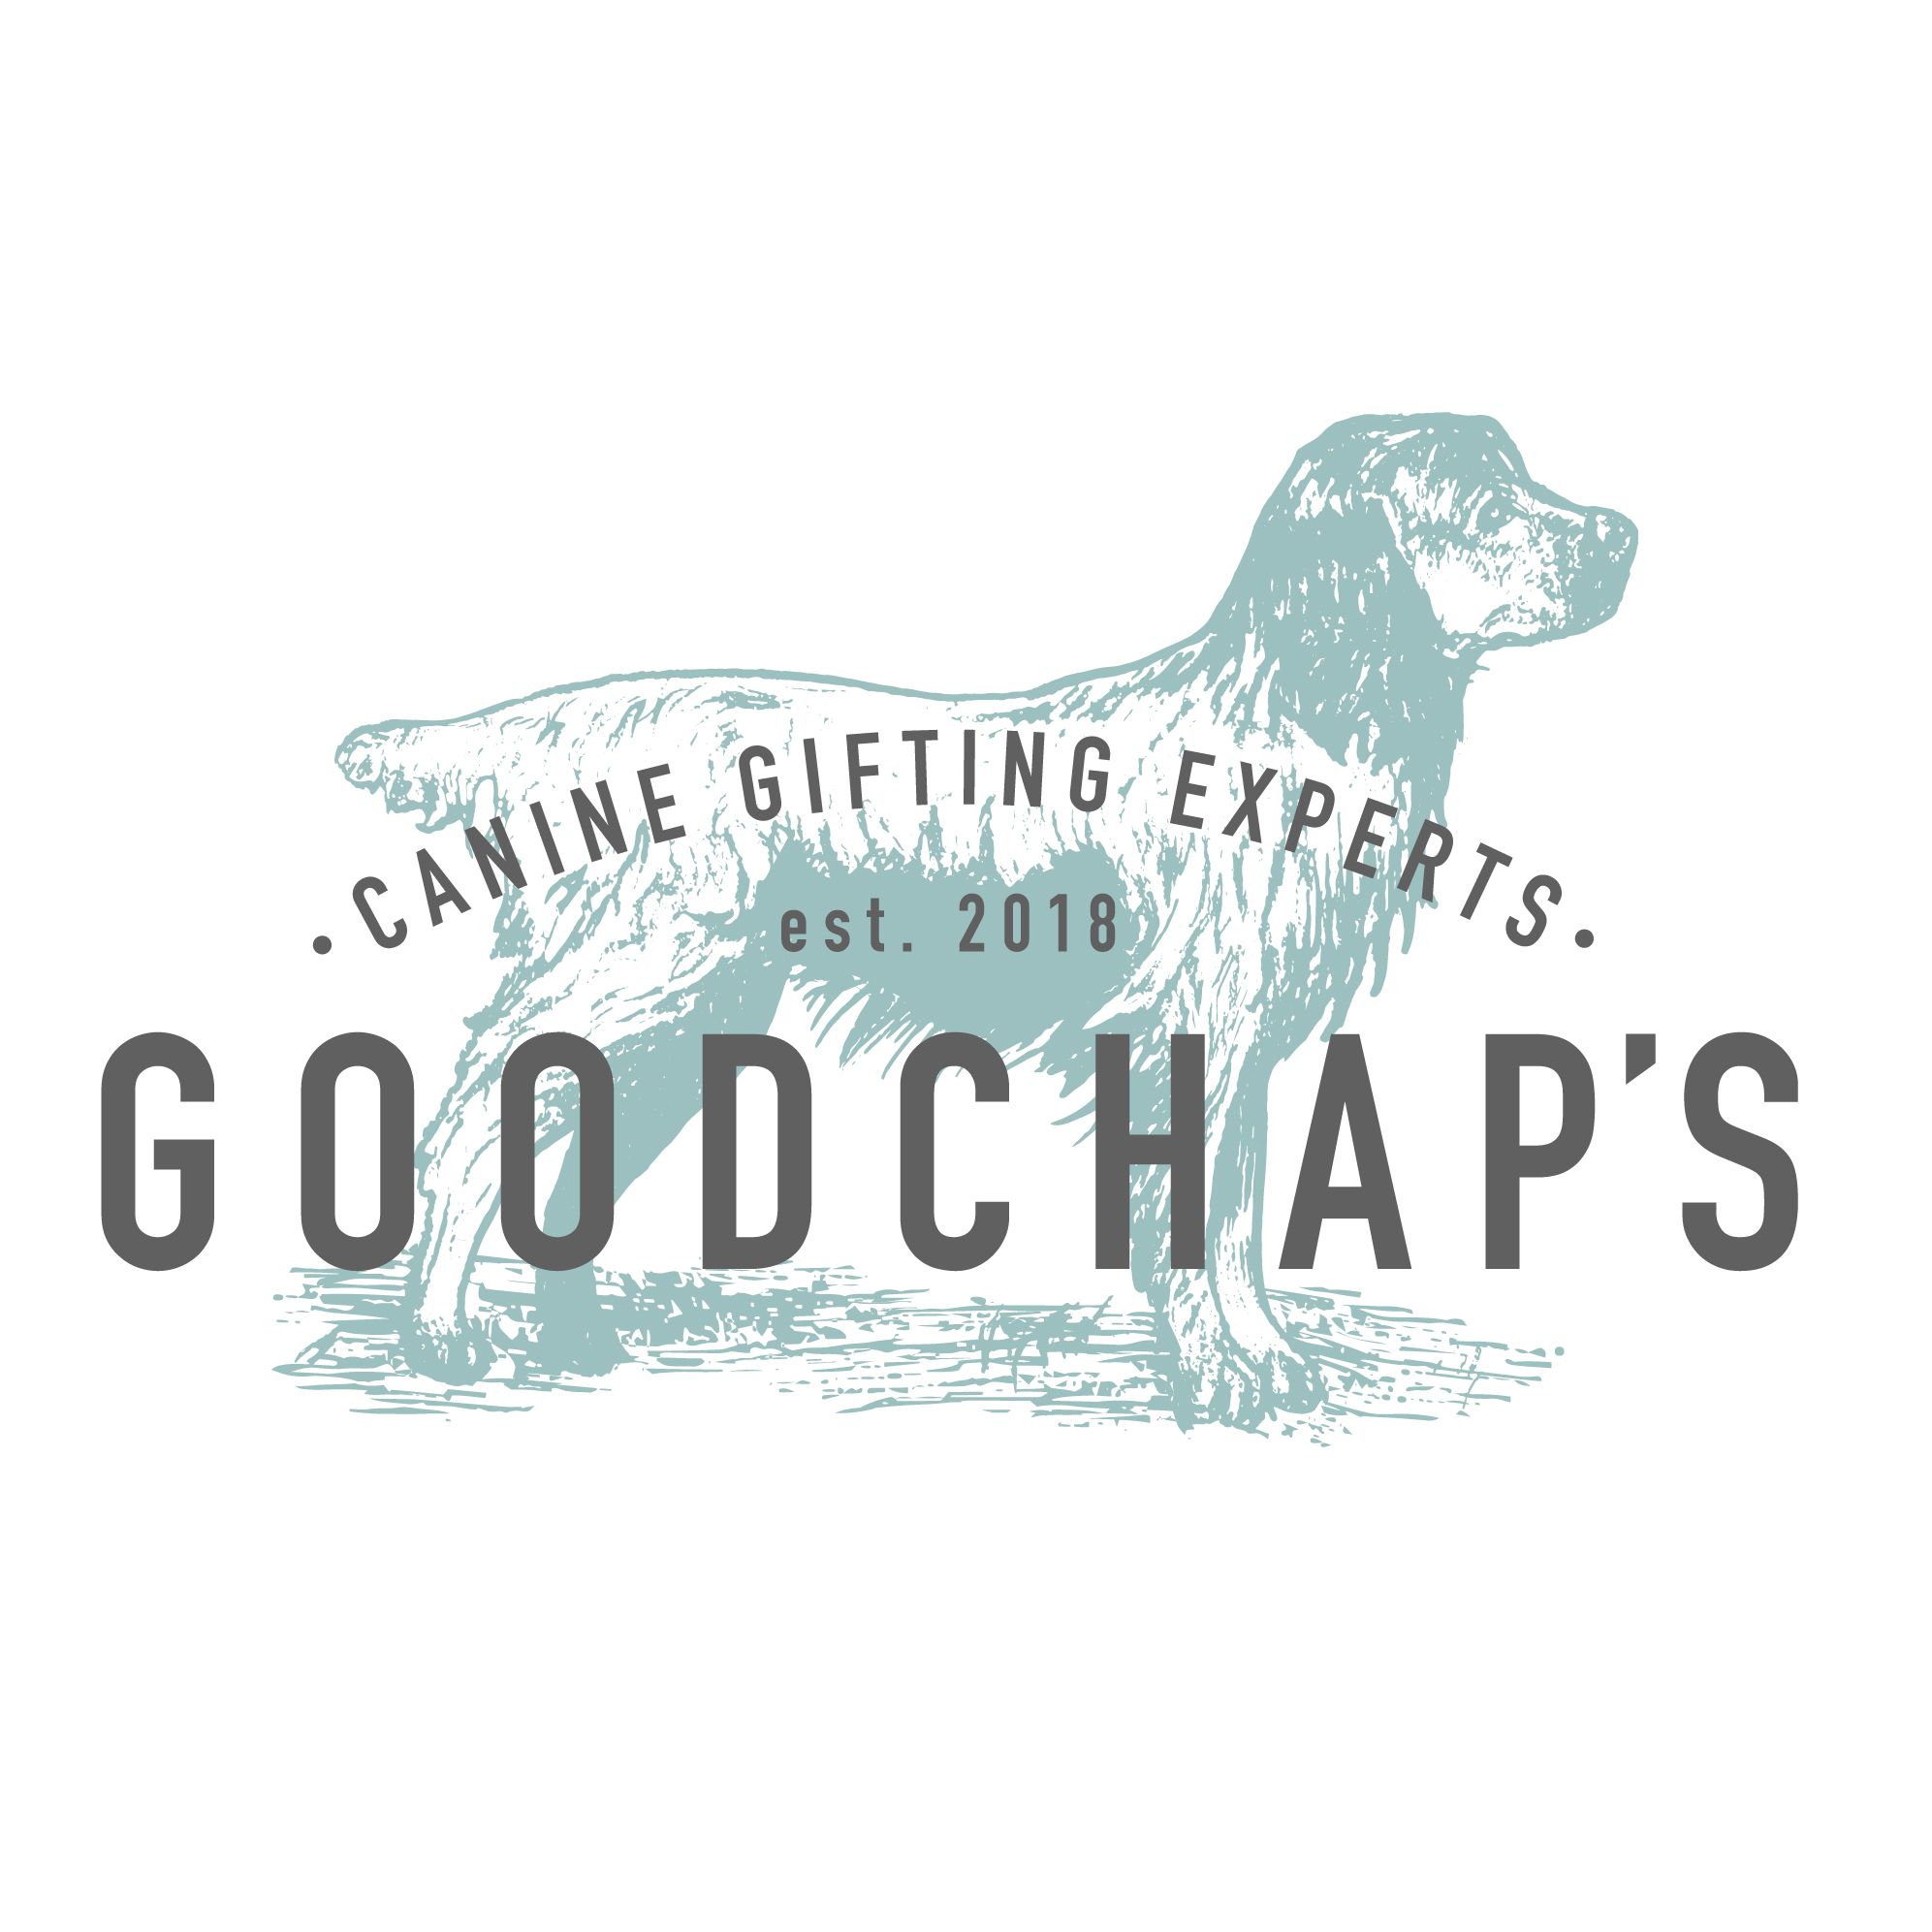 Goodchap's - Eco Canine Experts